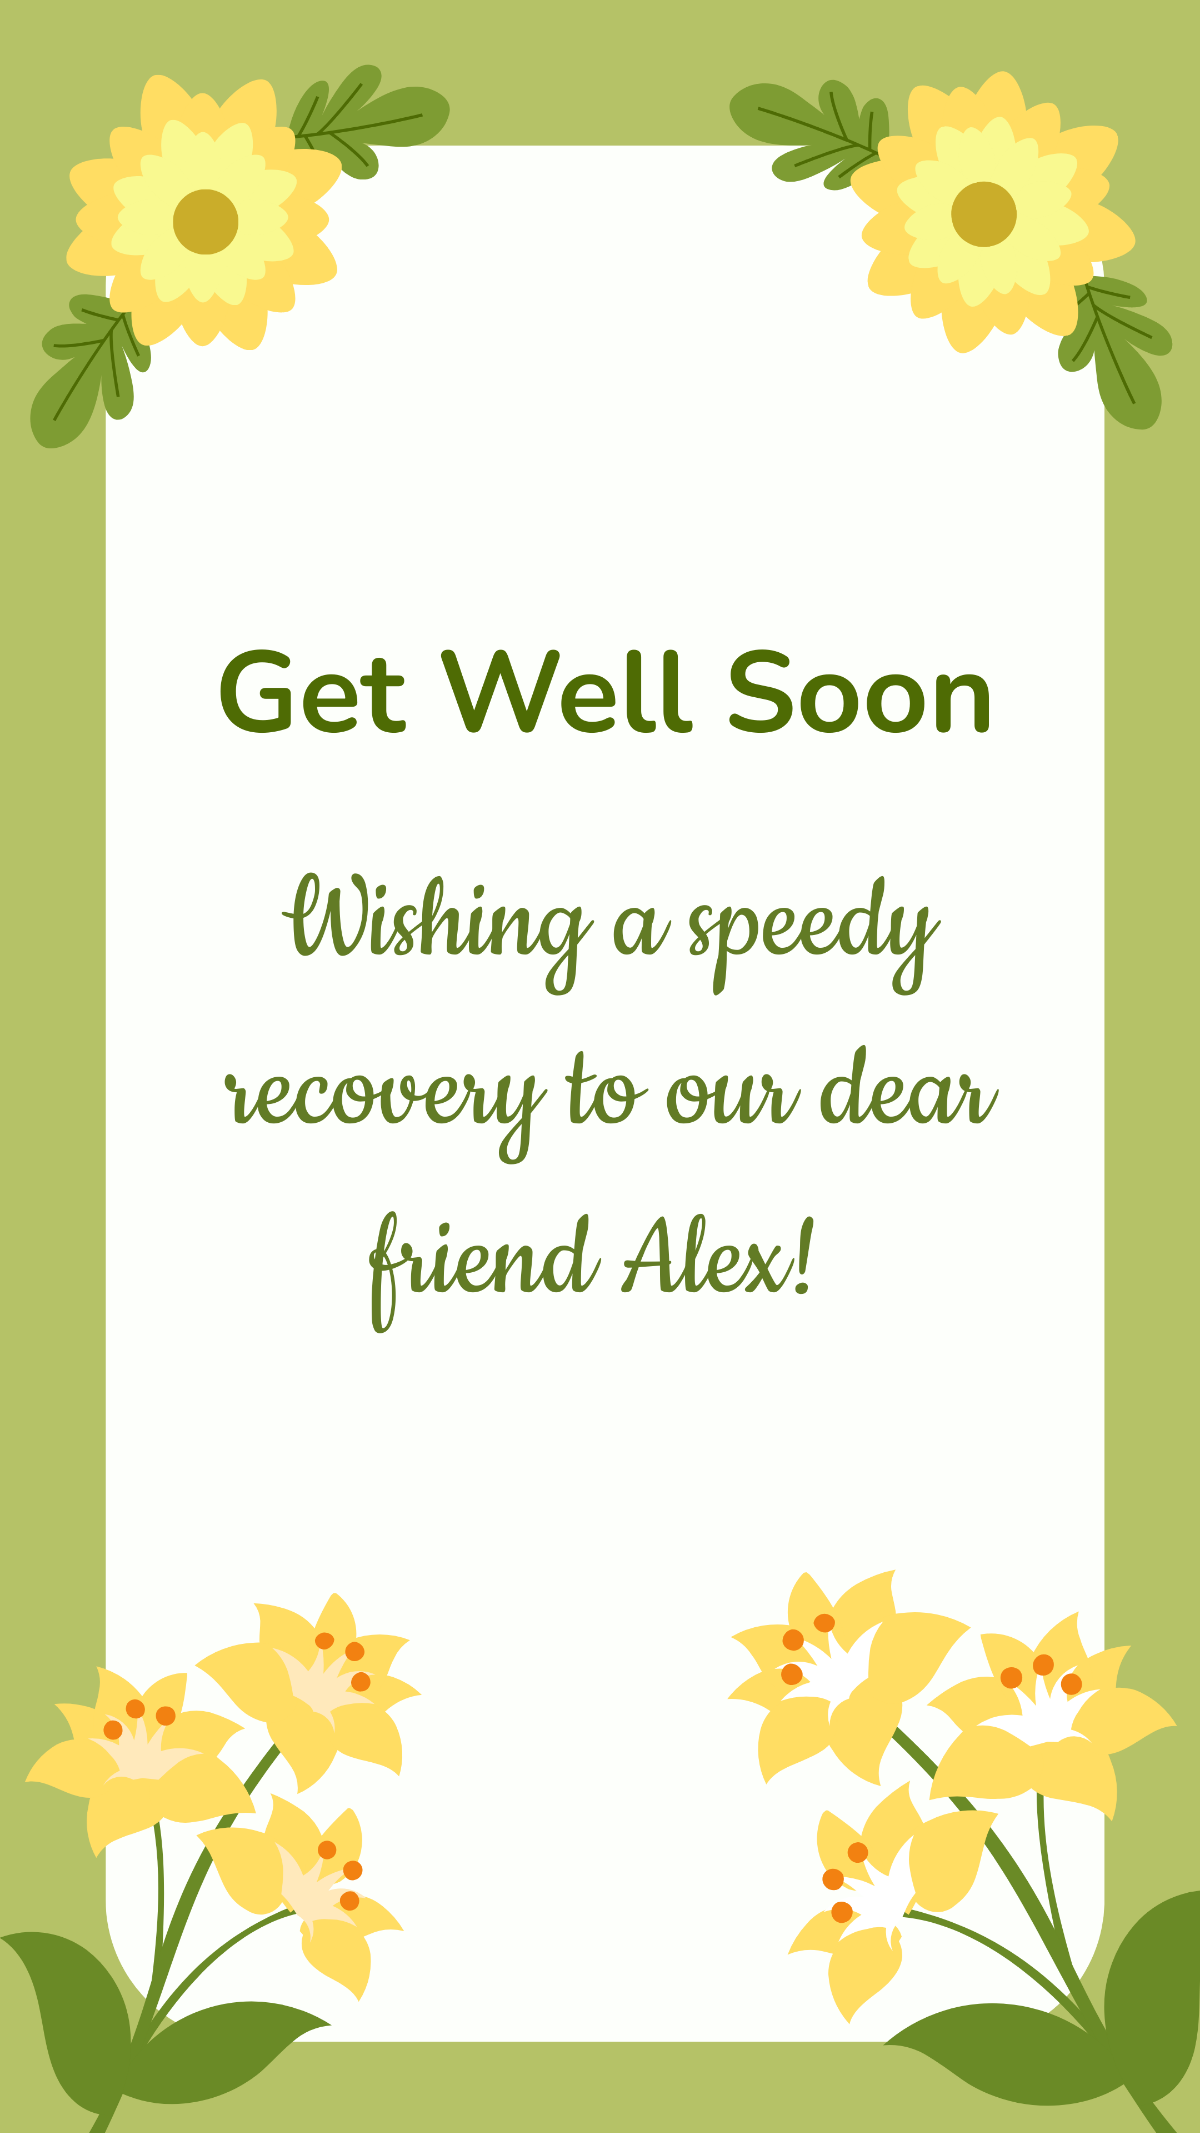 Get Well Soon Wishes Instagram Post